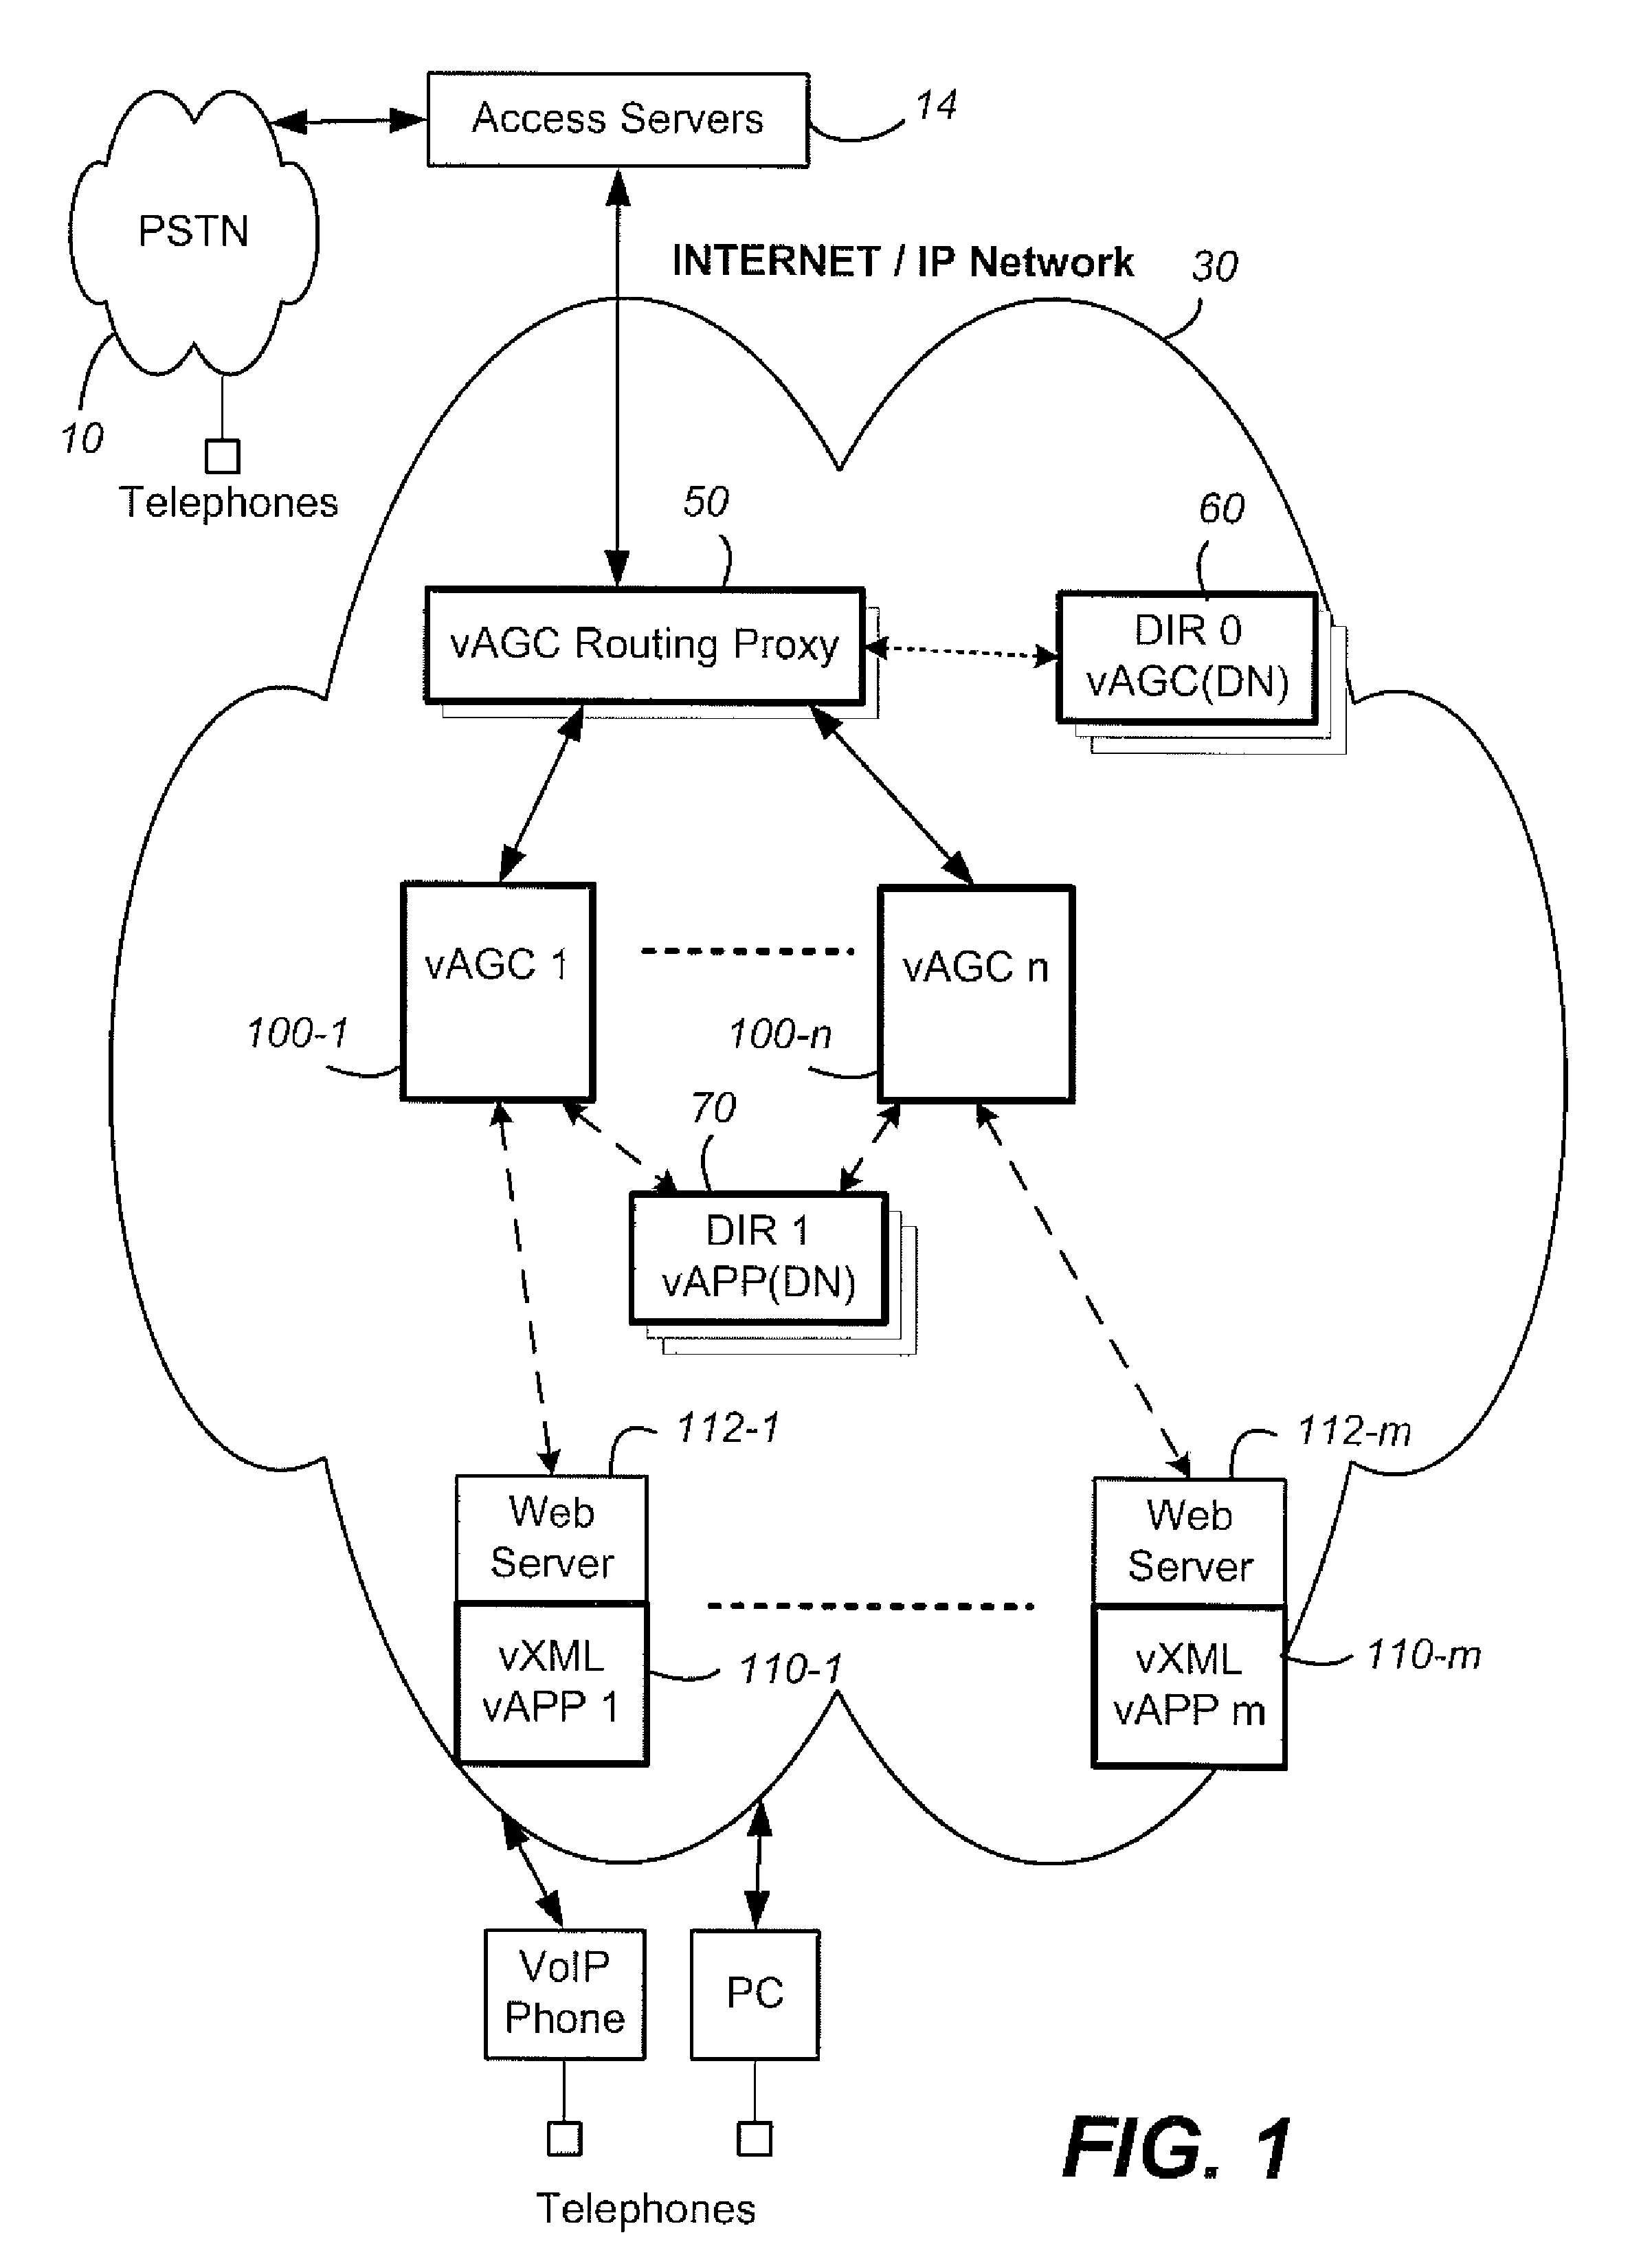 System and method for dynamic call-progress analysis and call processing